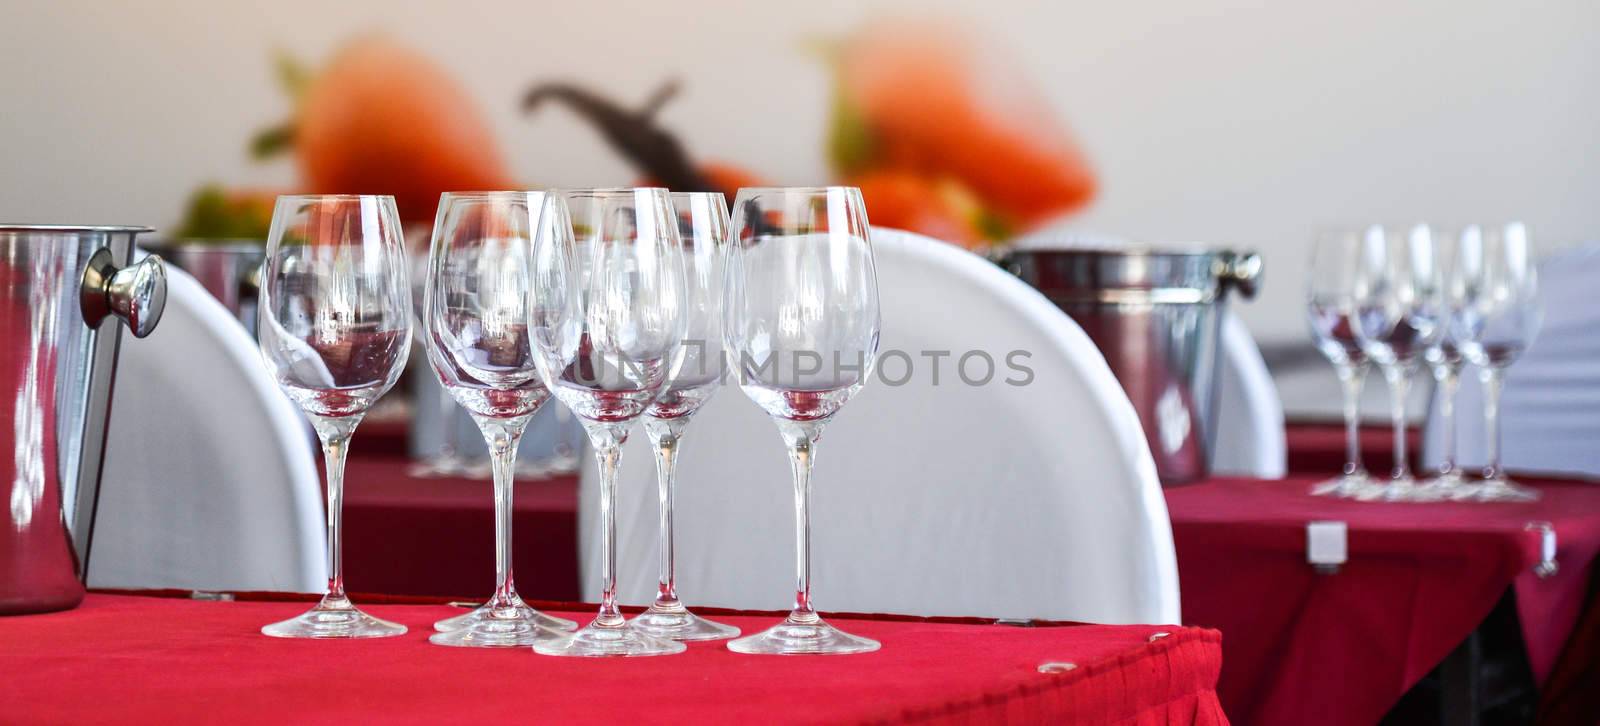 wine glasses on a table